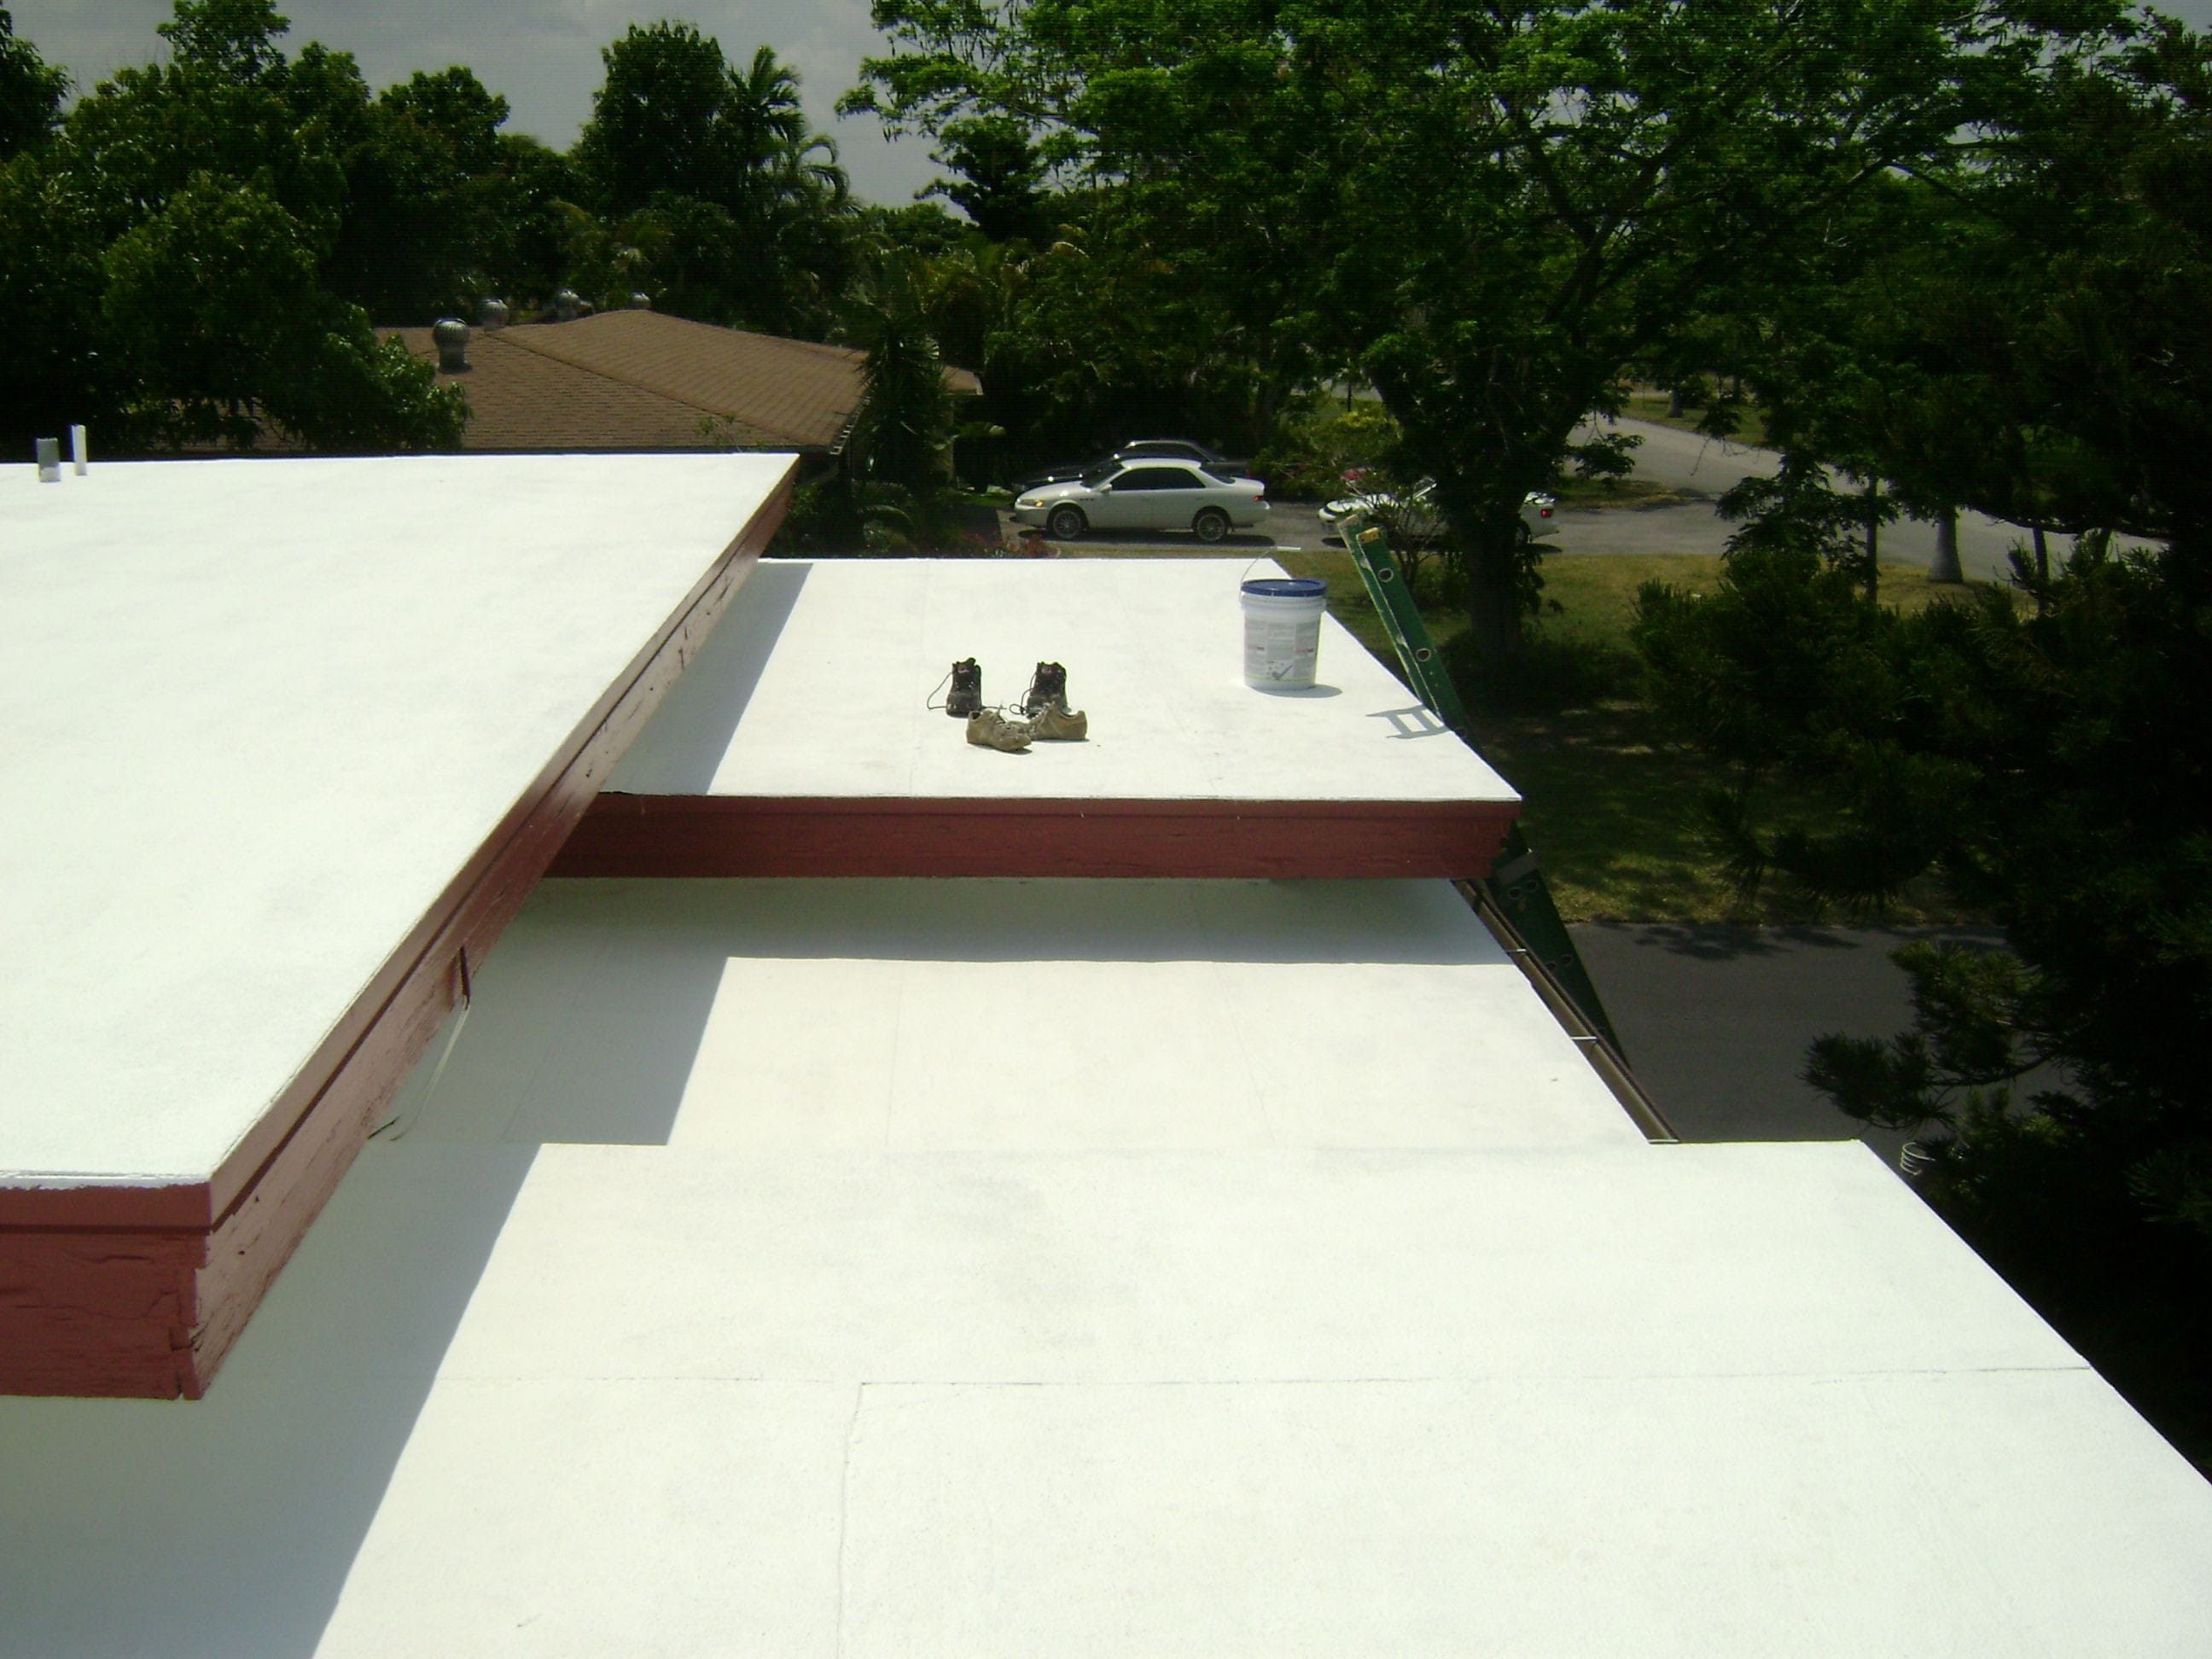 Achieve superior roof protection by insulating and waterproofing with elastomeric coatings. Our specialized coatings offer a flexible and durable barrier